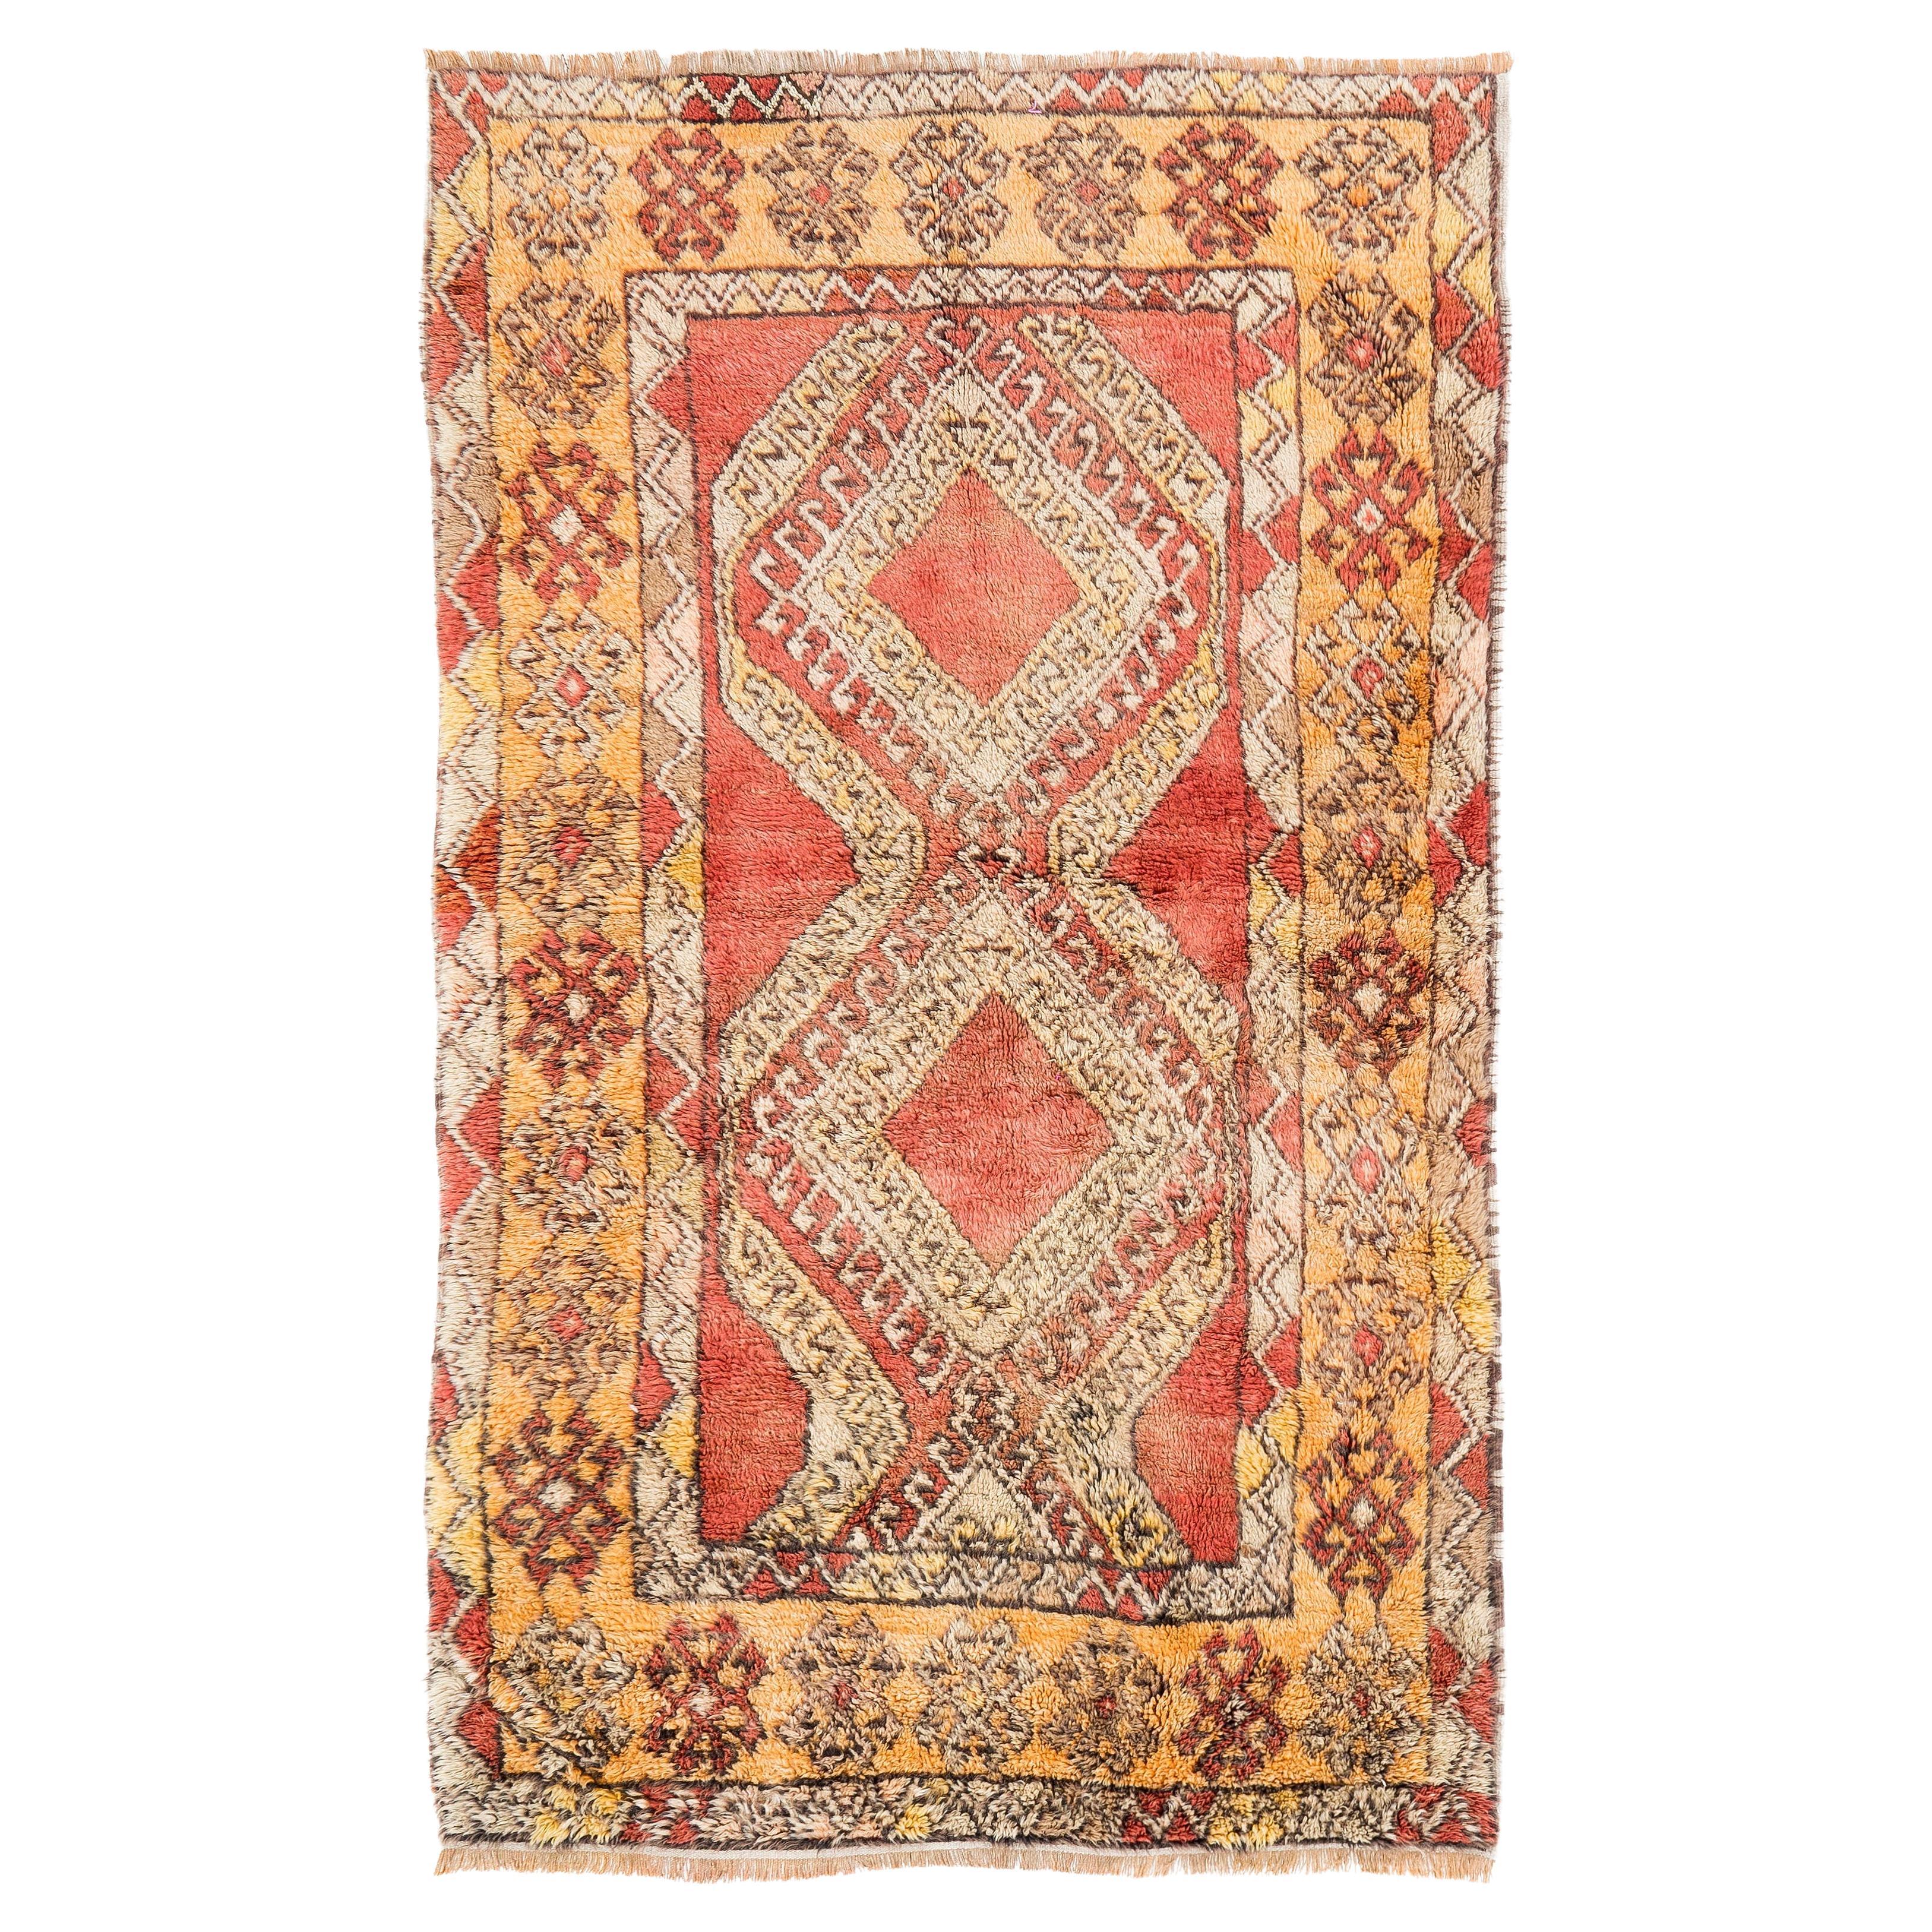 3.4x5.7 Ft Vintage Hand-knotted Turkish "Tulu" Accent Rug in Warm Red and Yellow